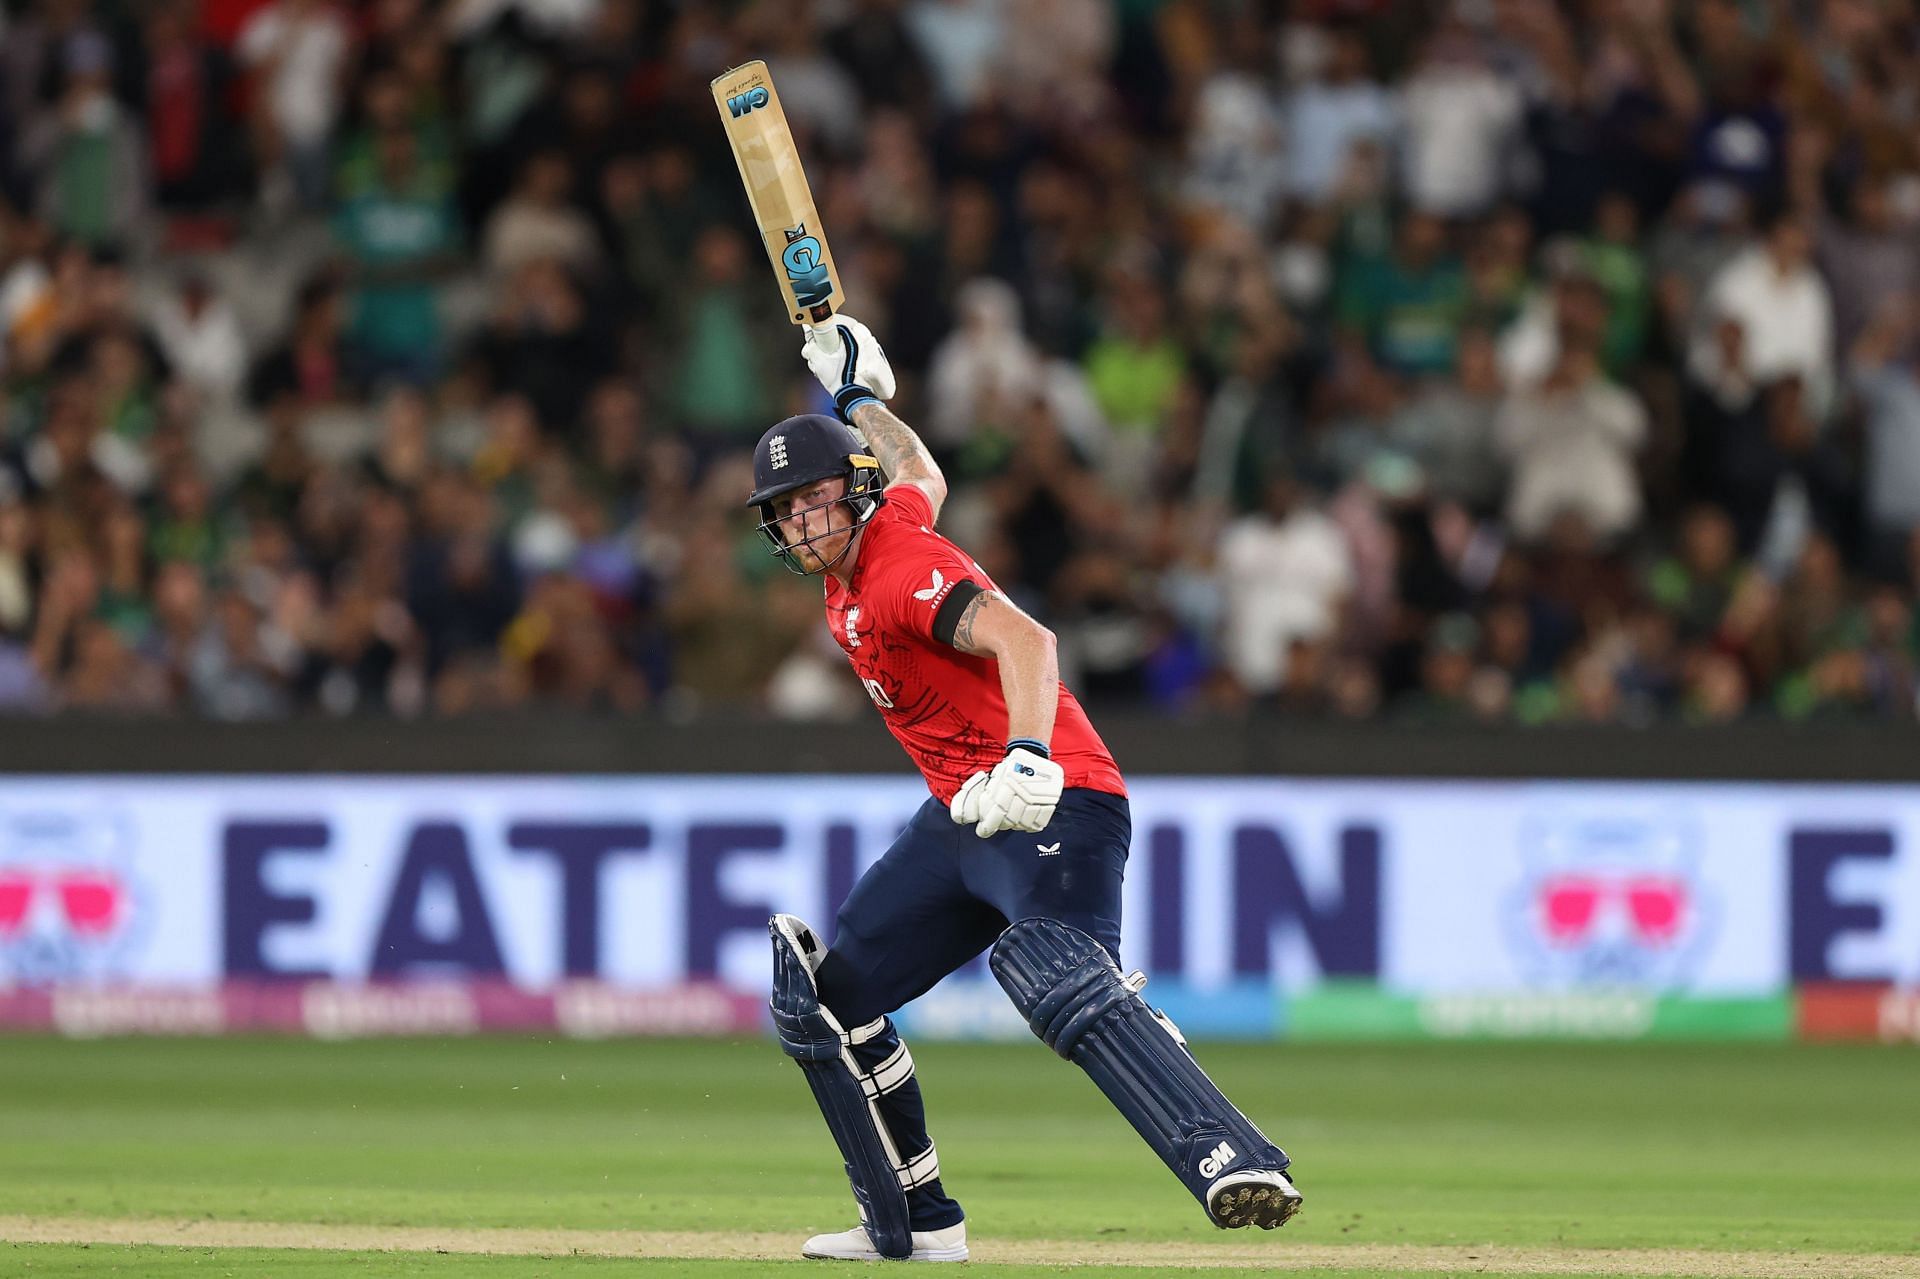 Ben Stokes celebrates after hitting the winning runs in the Final of the 2022 T20 World Cup